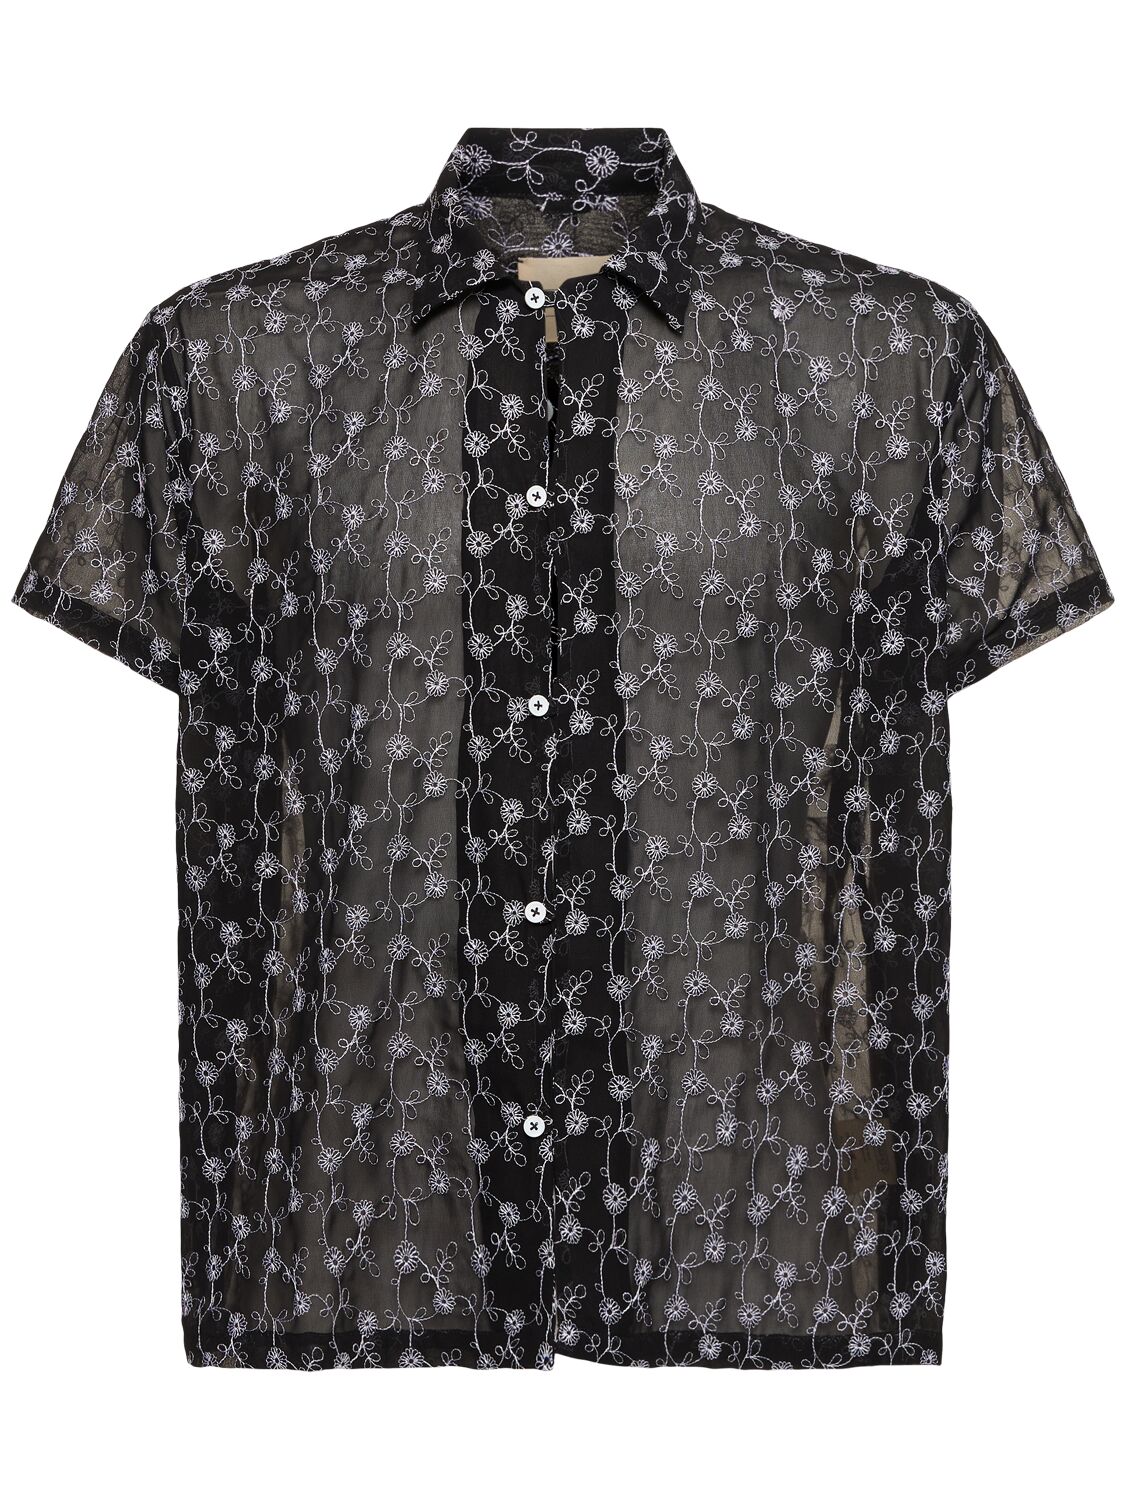 Harago Cotton Lace S/s Shirt In Black